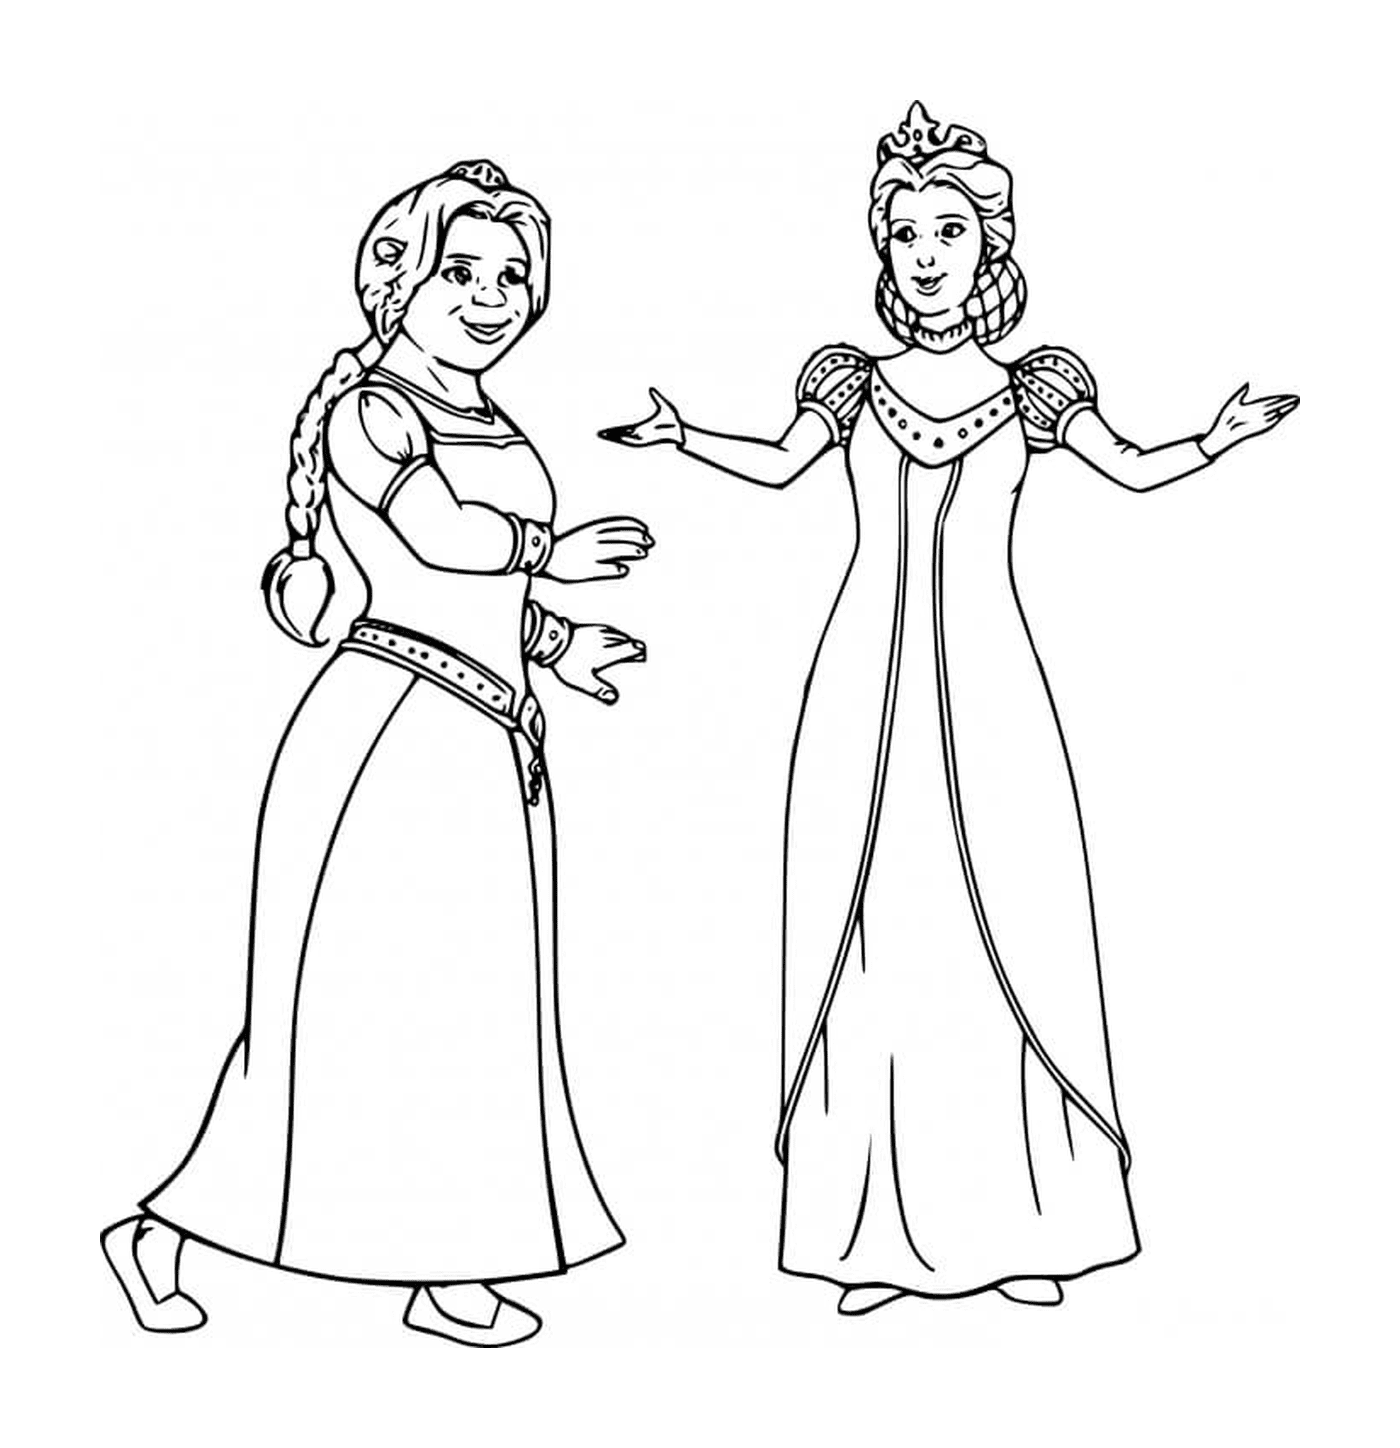  Two women in a medieval dress 